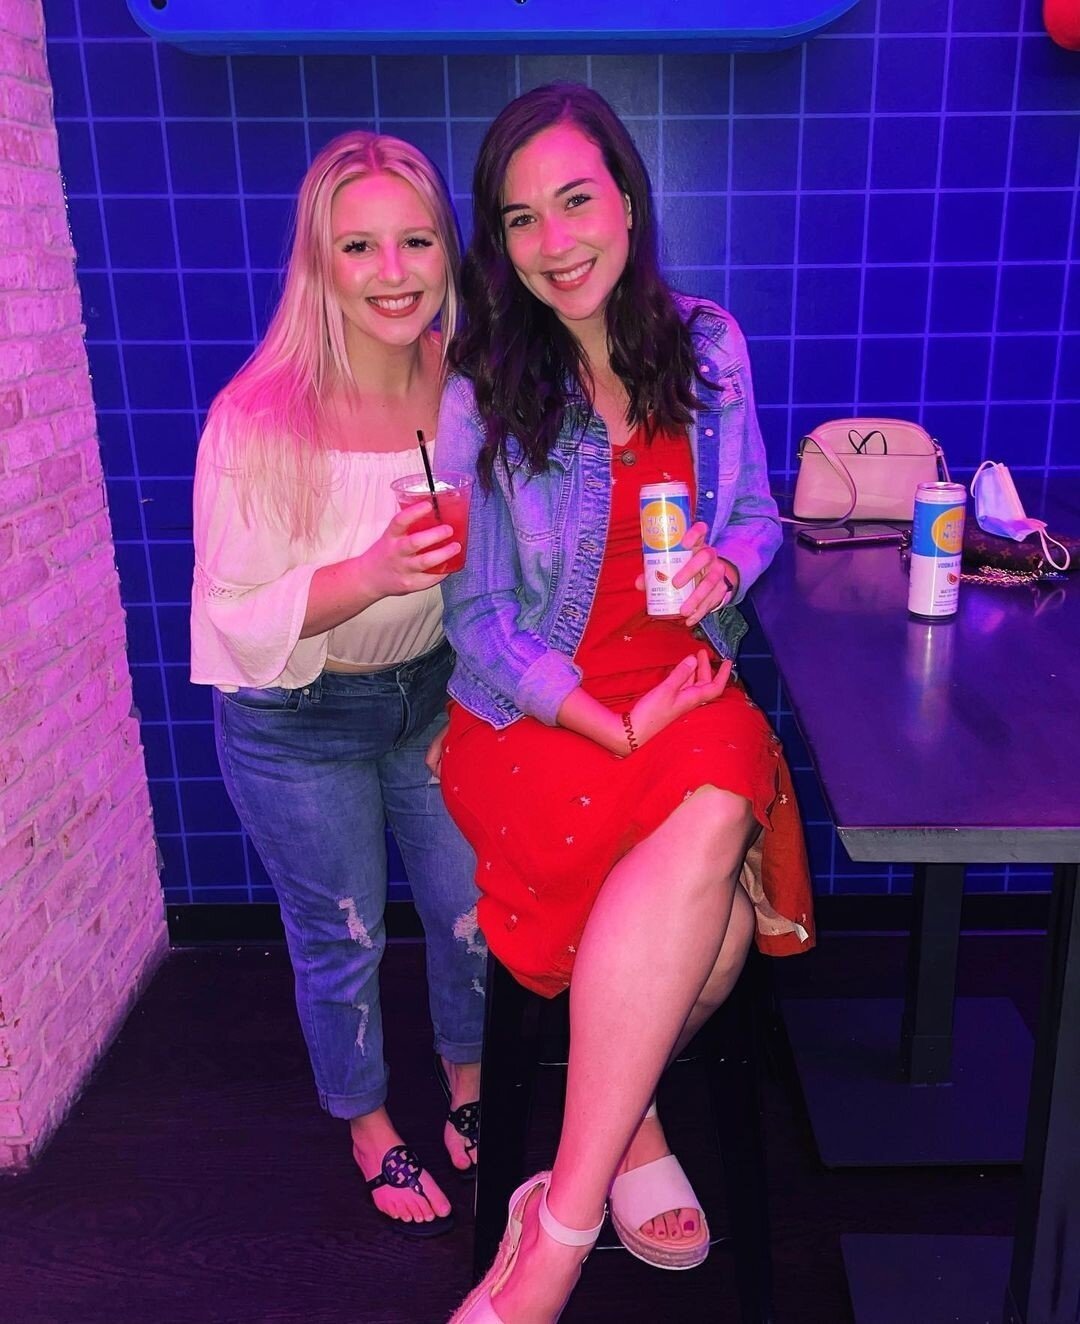 Thursdays are for the girls! 🎉👯&zwj;♀️ Drink specials, liquor pitchers, $100 bottles, @giuseppetheDJ with the tunes...tag your girls &amp; make plans now! #ParkRecTPA⁠
&bull;⁠
📸 : @haleedodson⁠